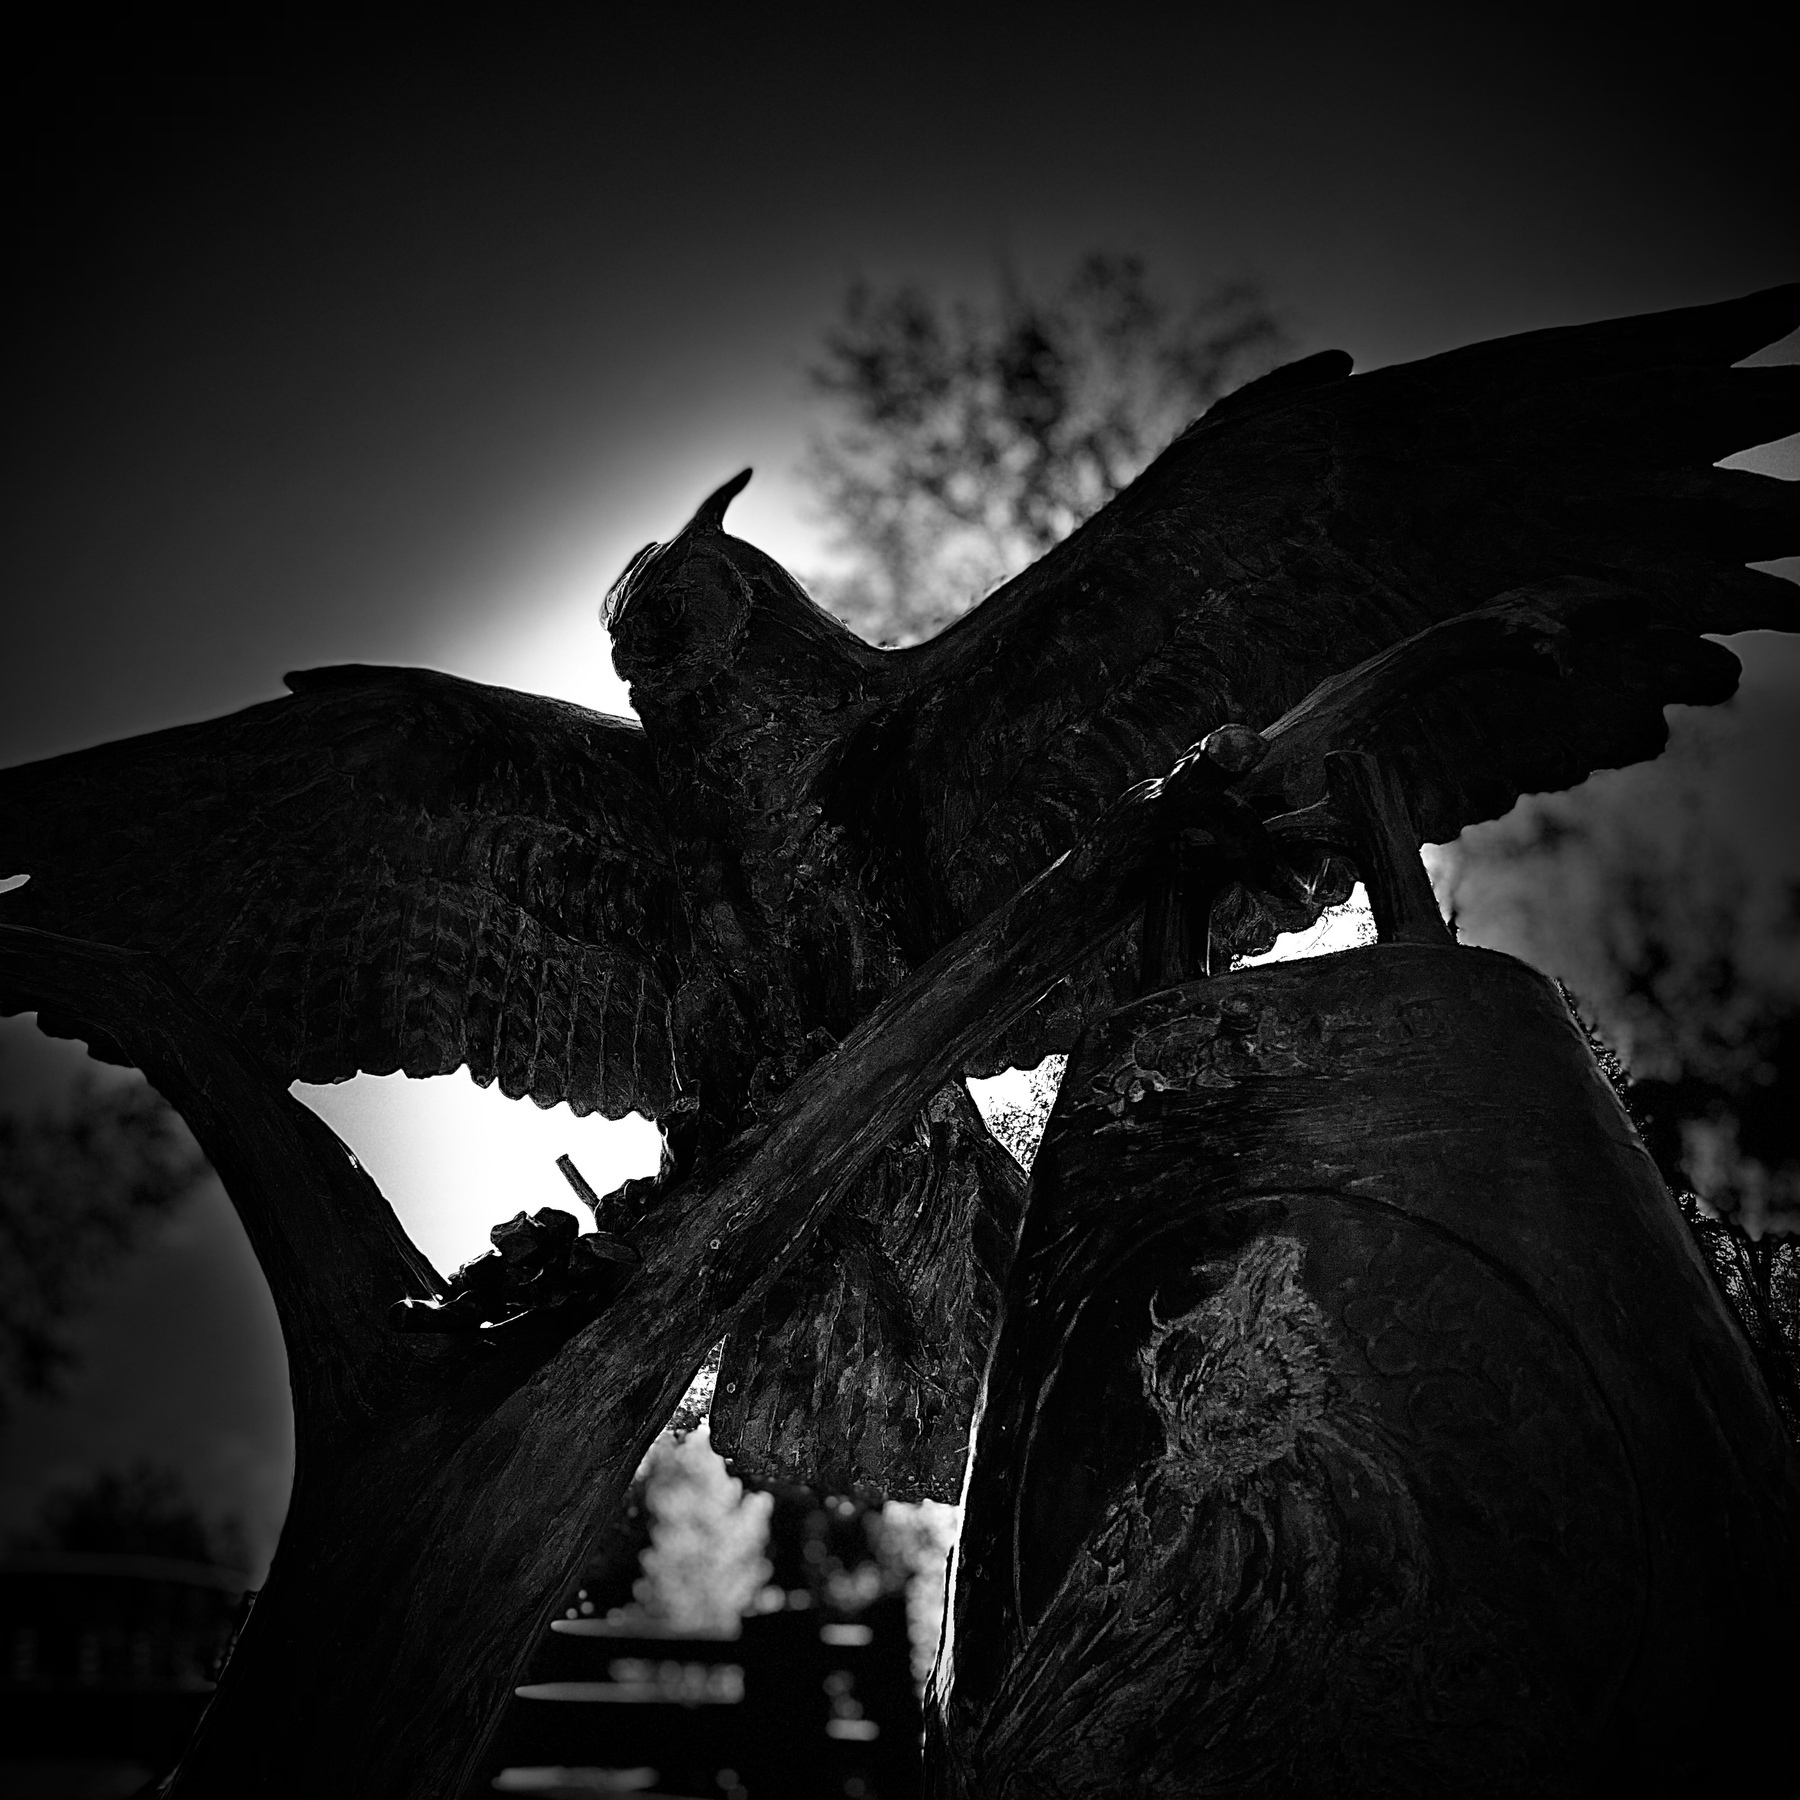 Owl statue, black and white.